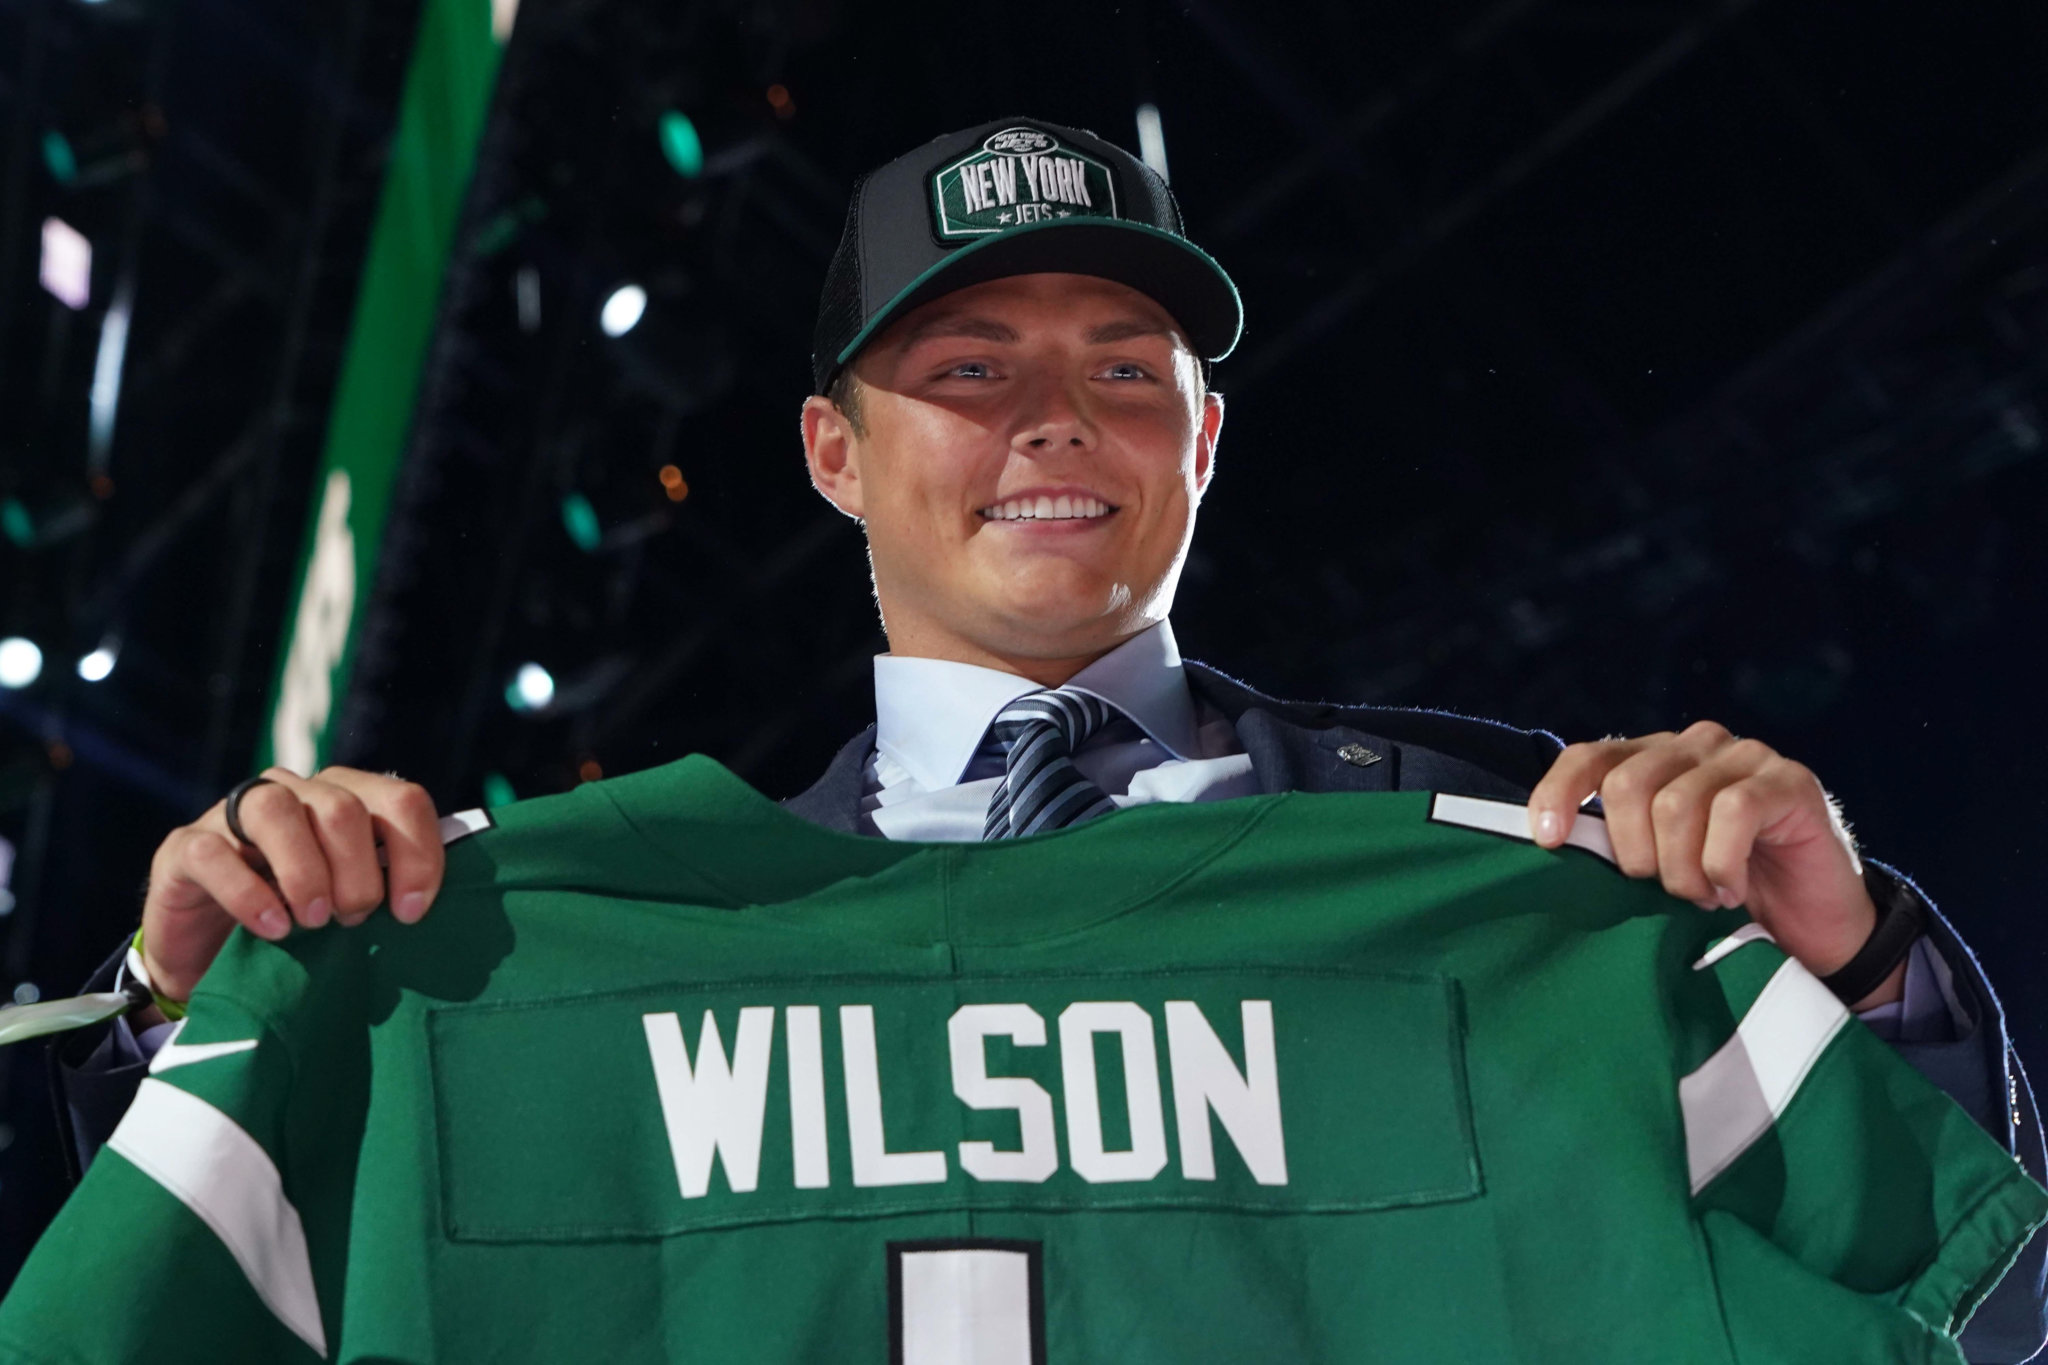 Zach Wilson knows Jets’ starting QB job ‘has to be earned’ amNewYork